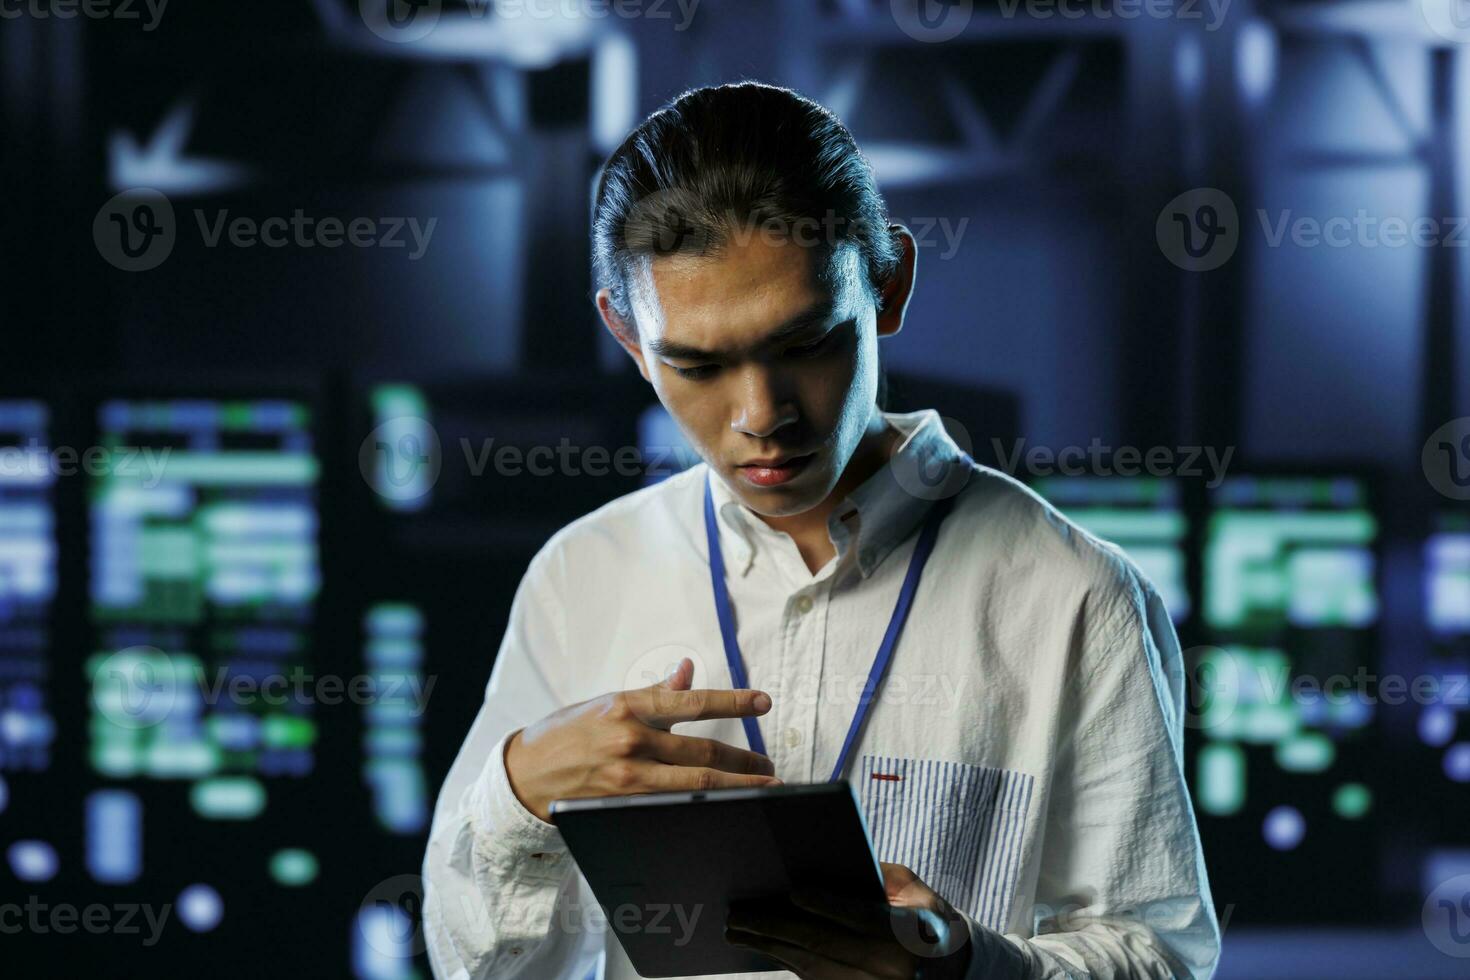 Tech support worker between server hub clusters providing processing resources for businesses worldwide. Overseeing supervisor fixes data center mainframes used for managing massive databases photo